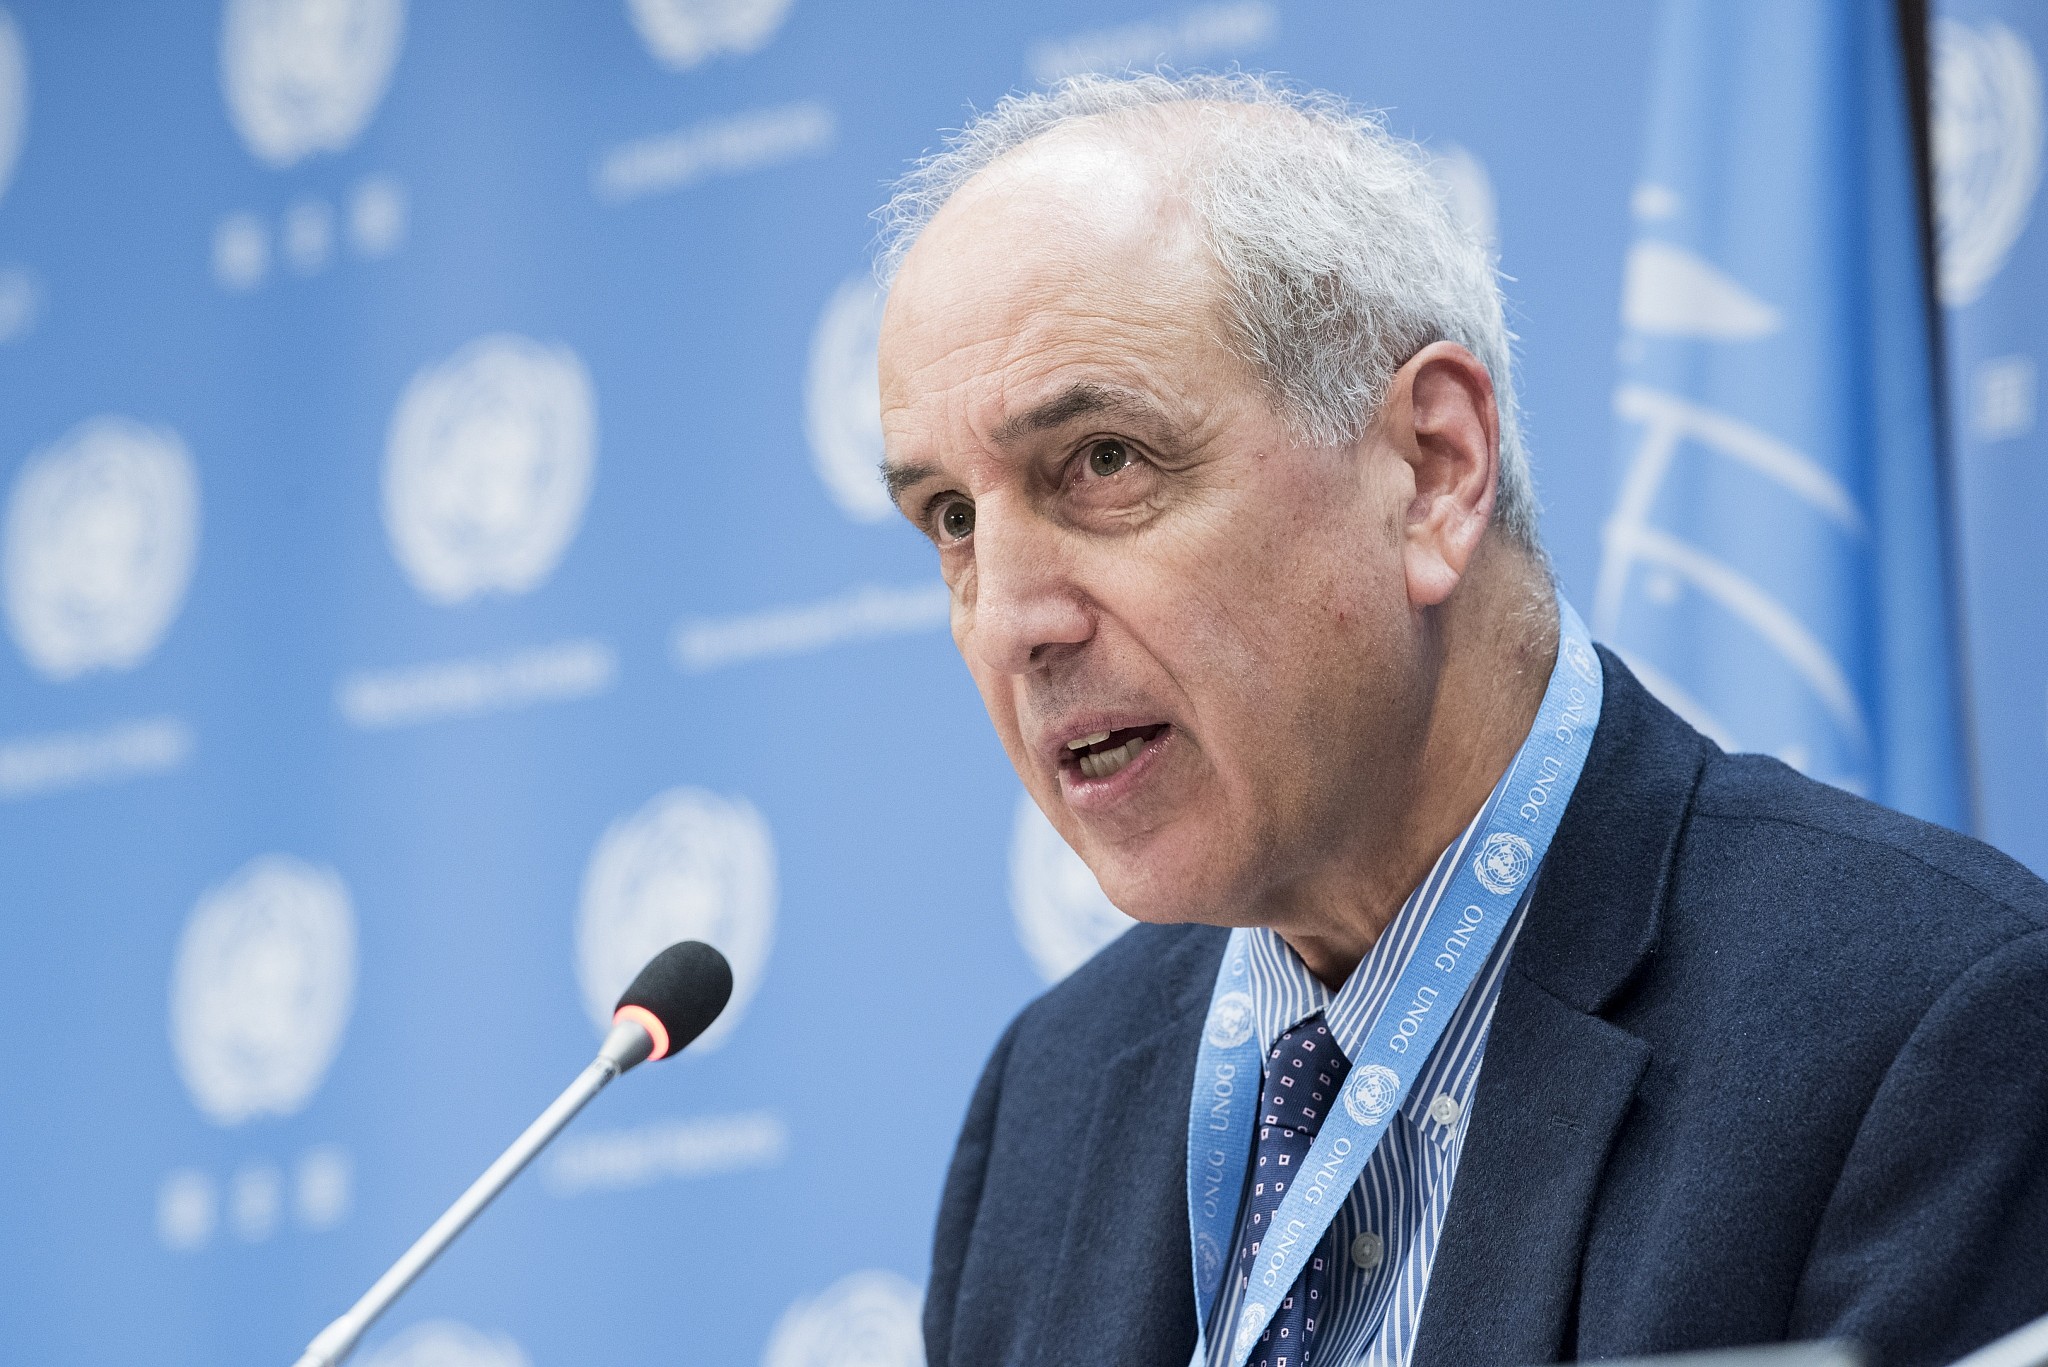 UN expert: Israel must be held to account for prolonging occupation